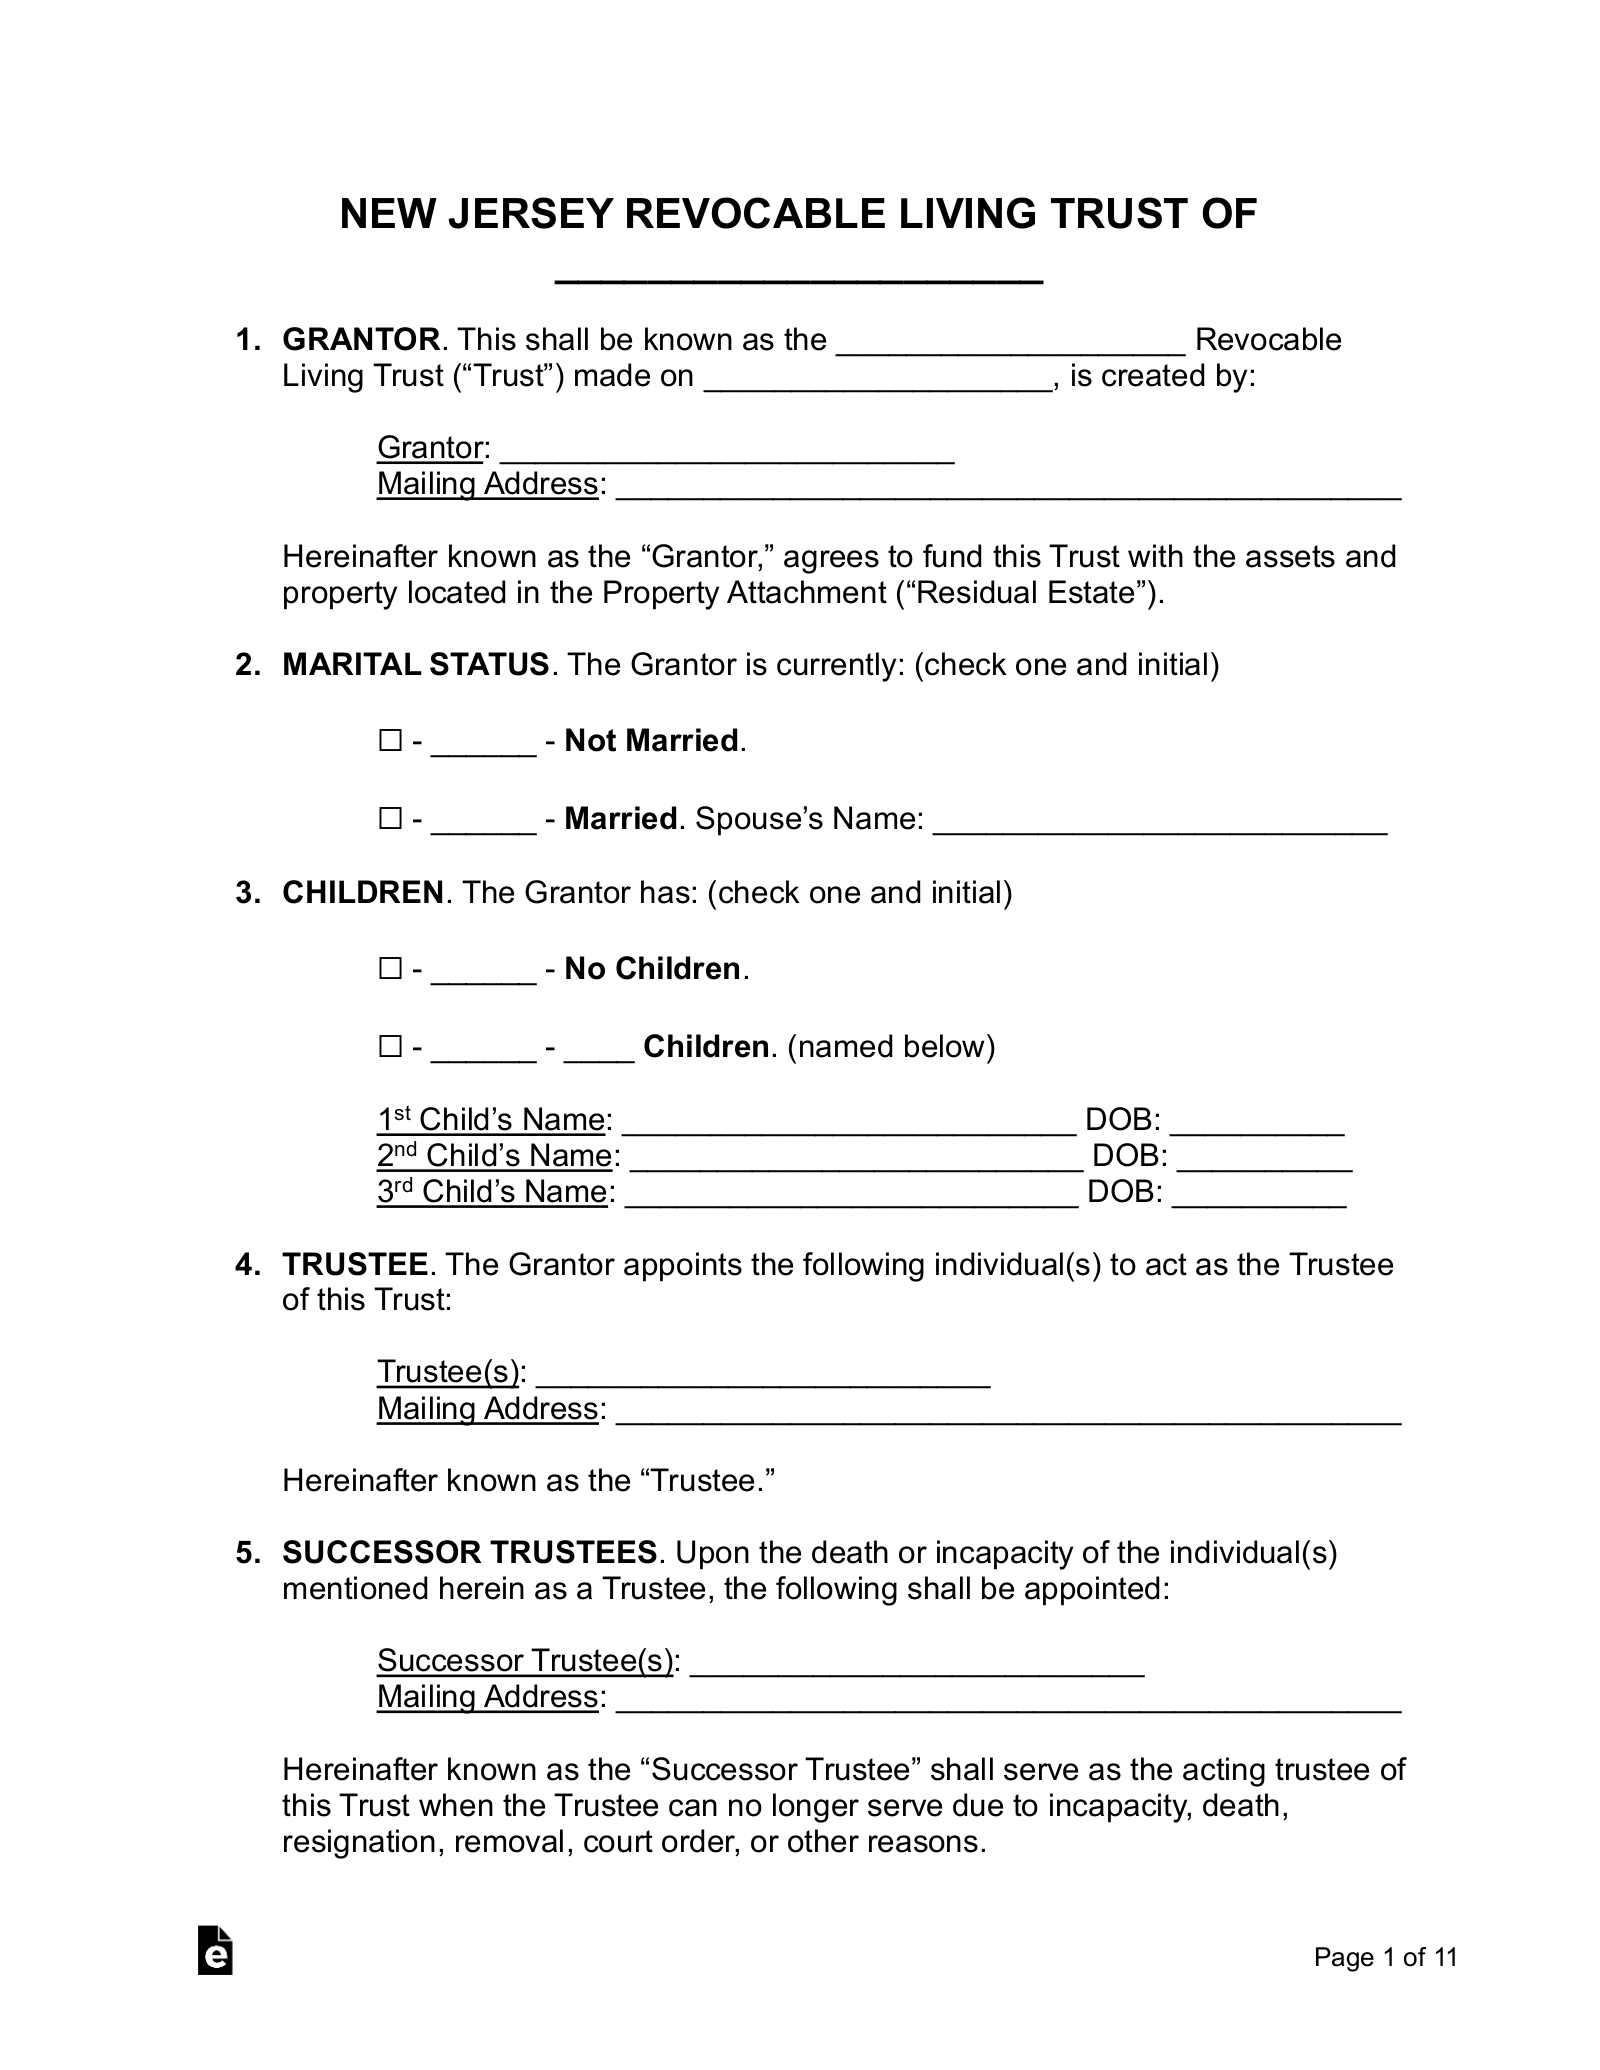 New Jersey Living Trust Form (Revocable)